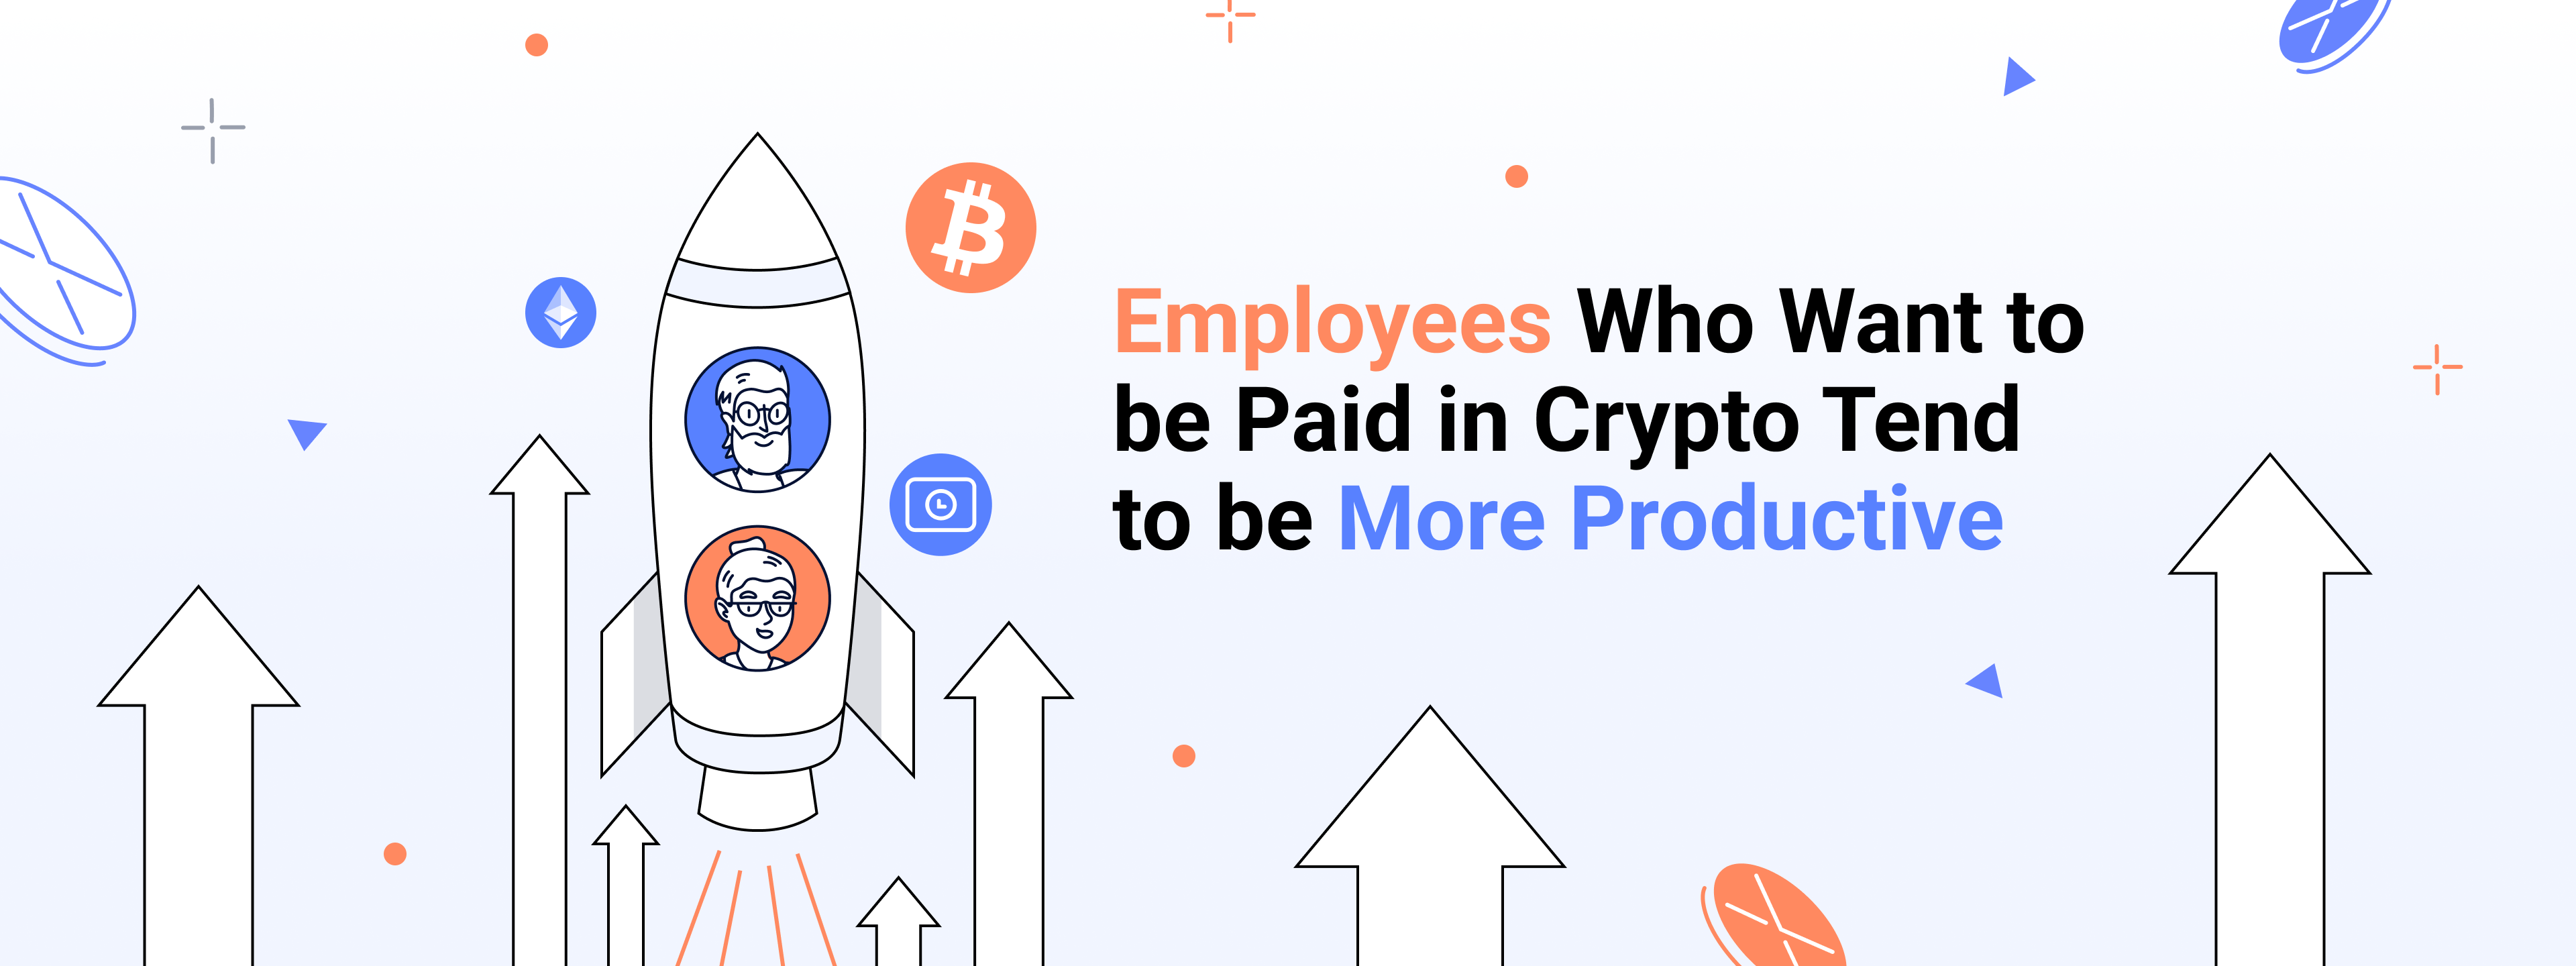 Employees Who Want To Be Paid In Crypto Tend To Be More Productive